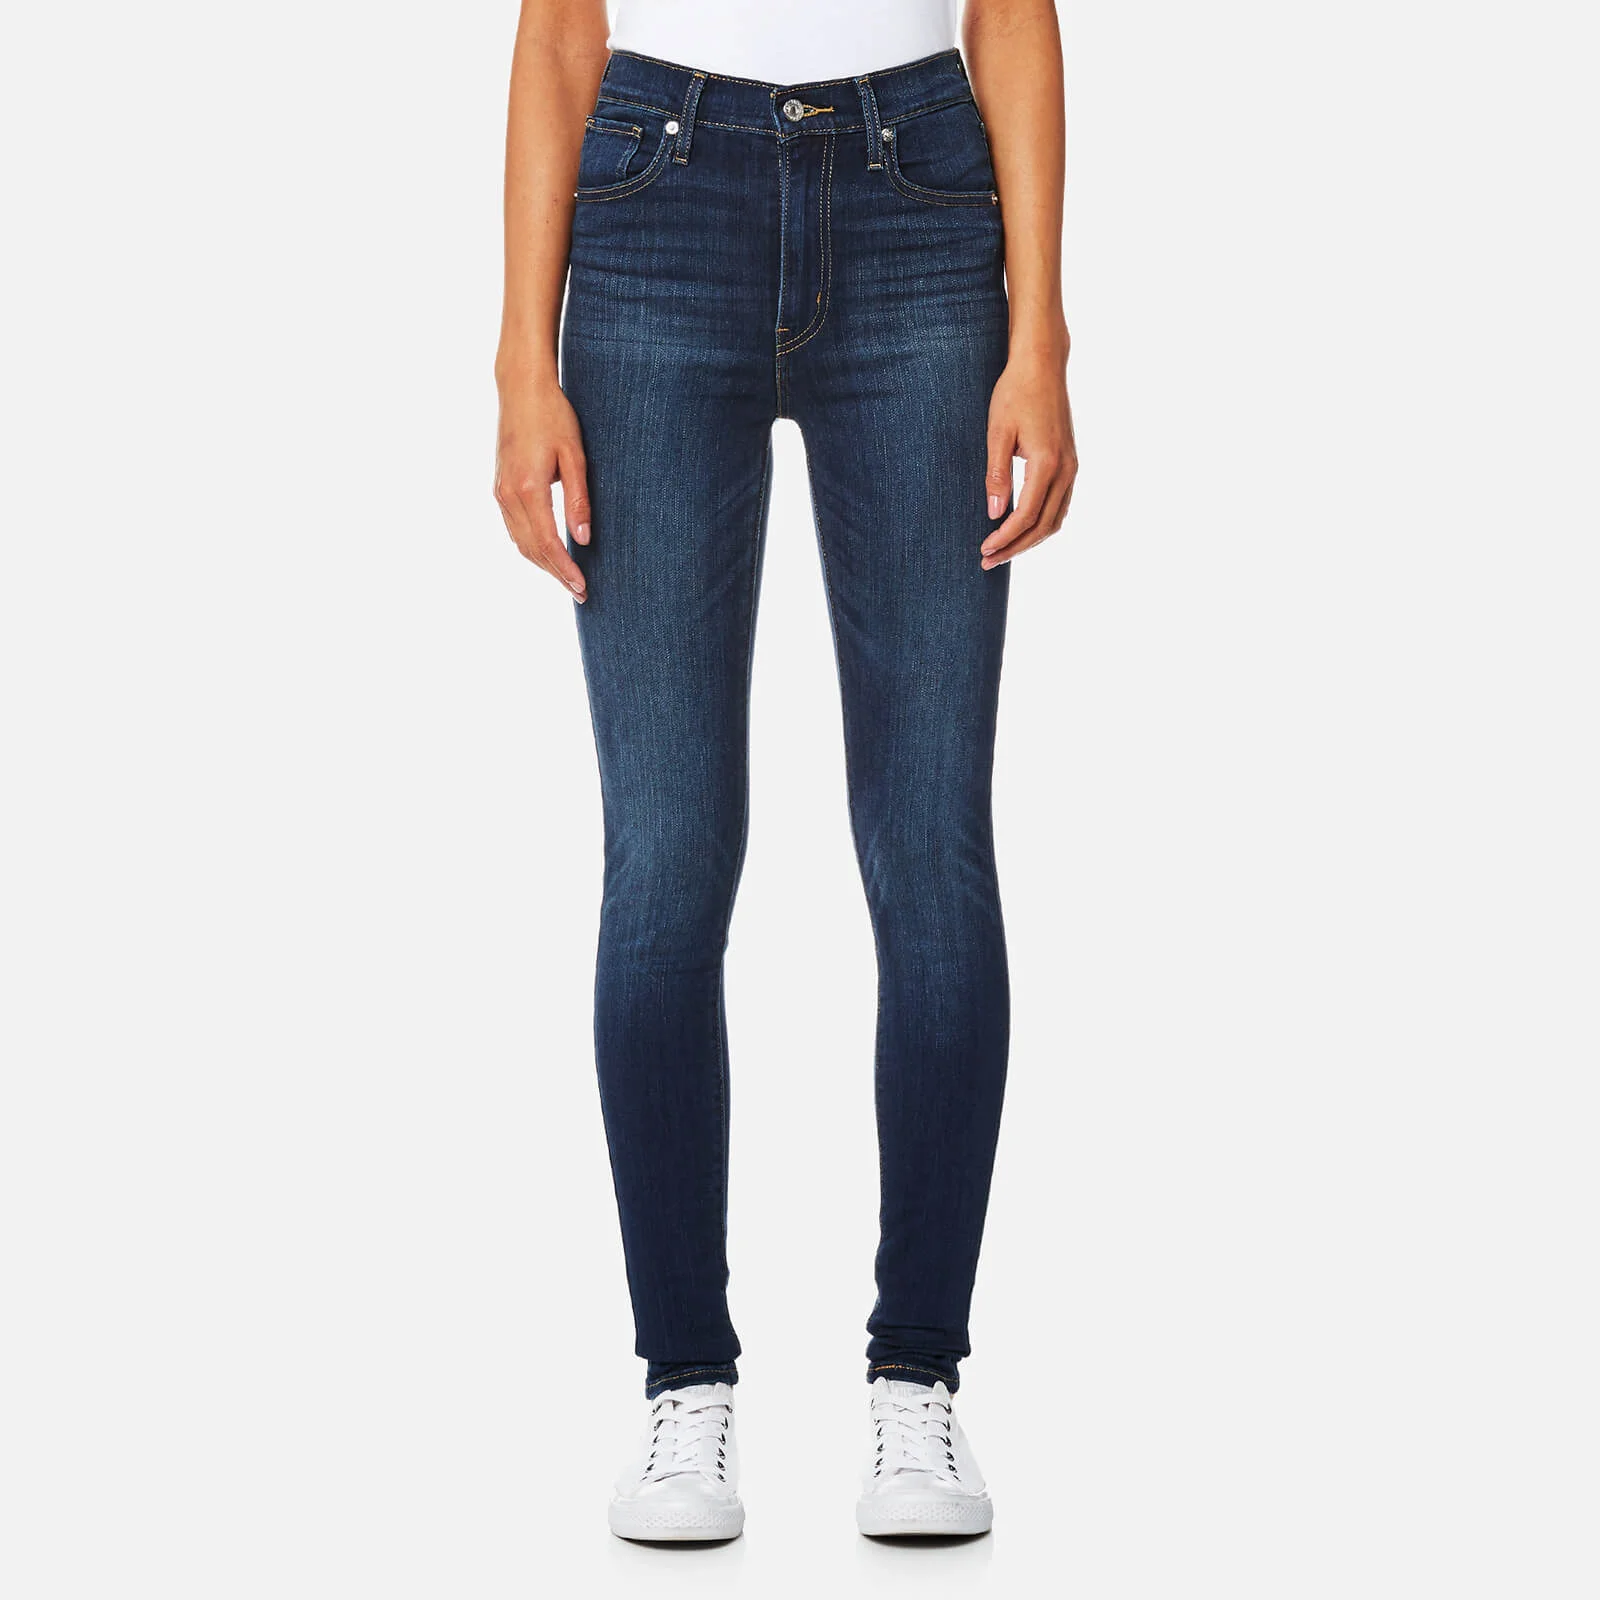 Levi's Women's Mile High Super Skinny Jeans - Lonesome Trail Image 1